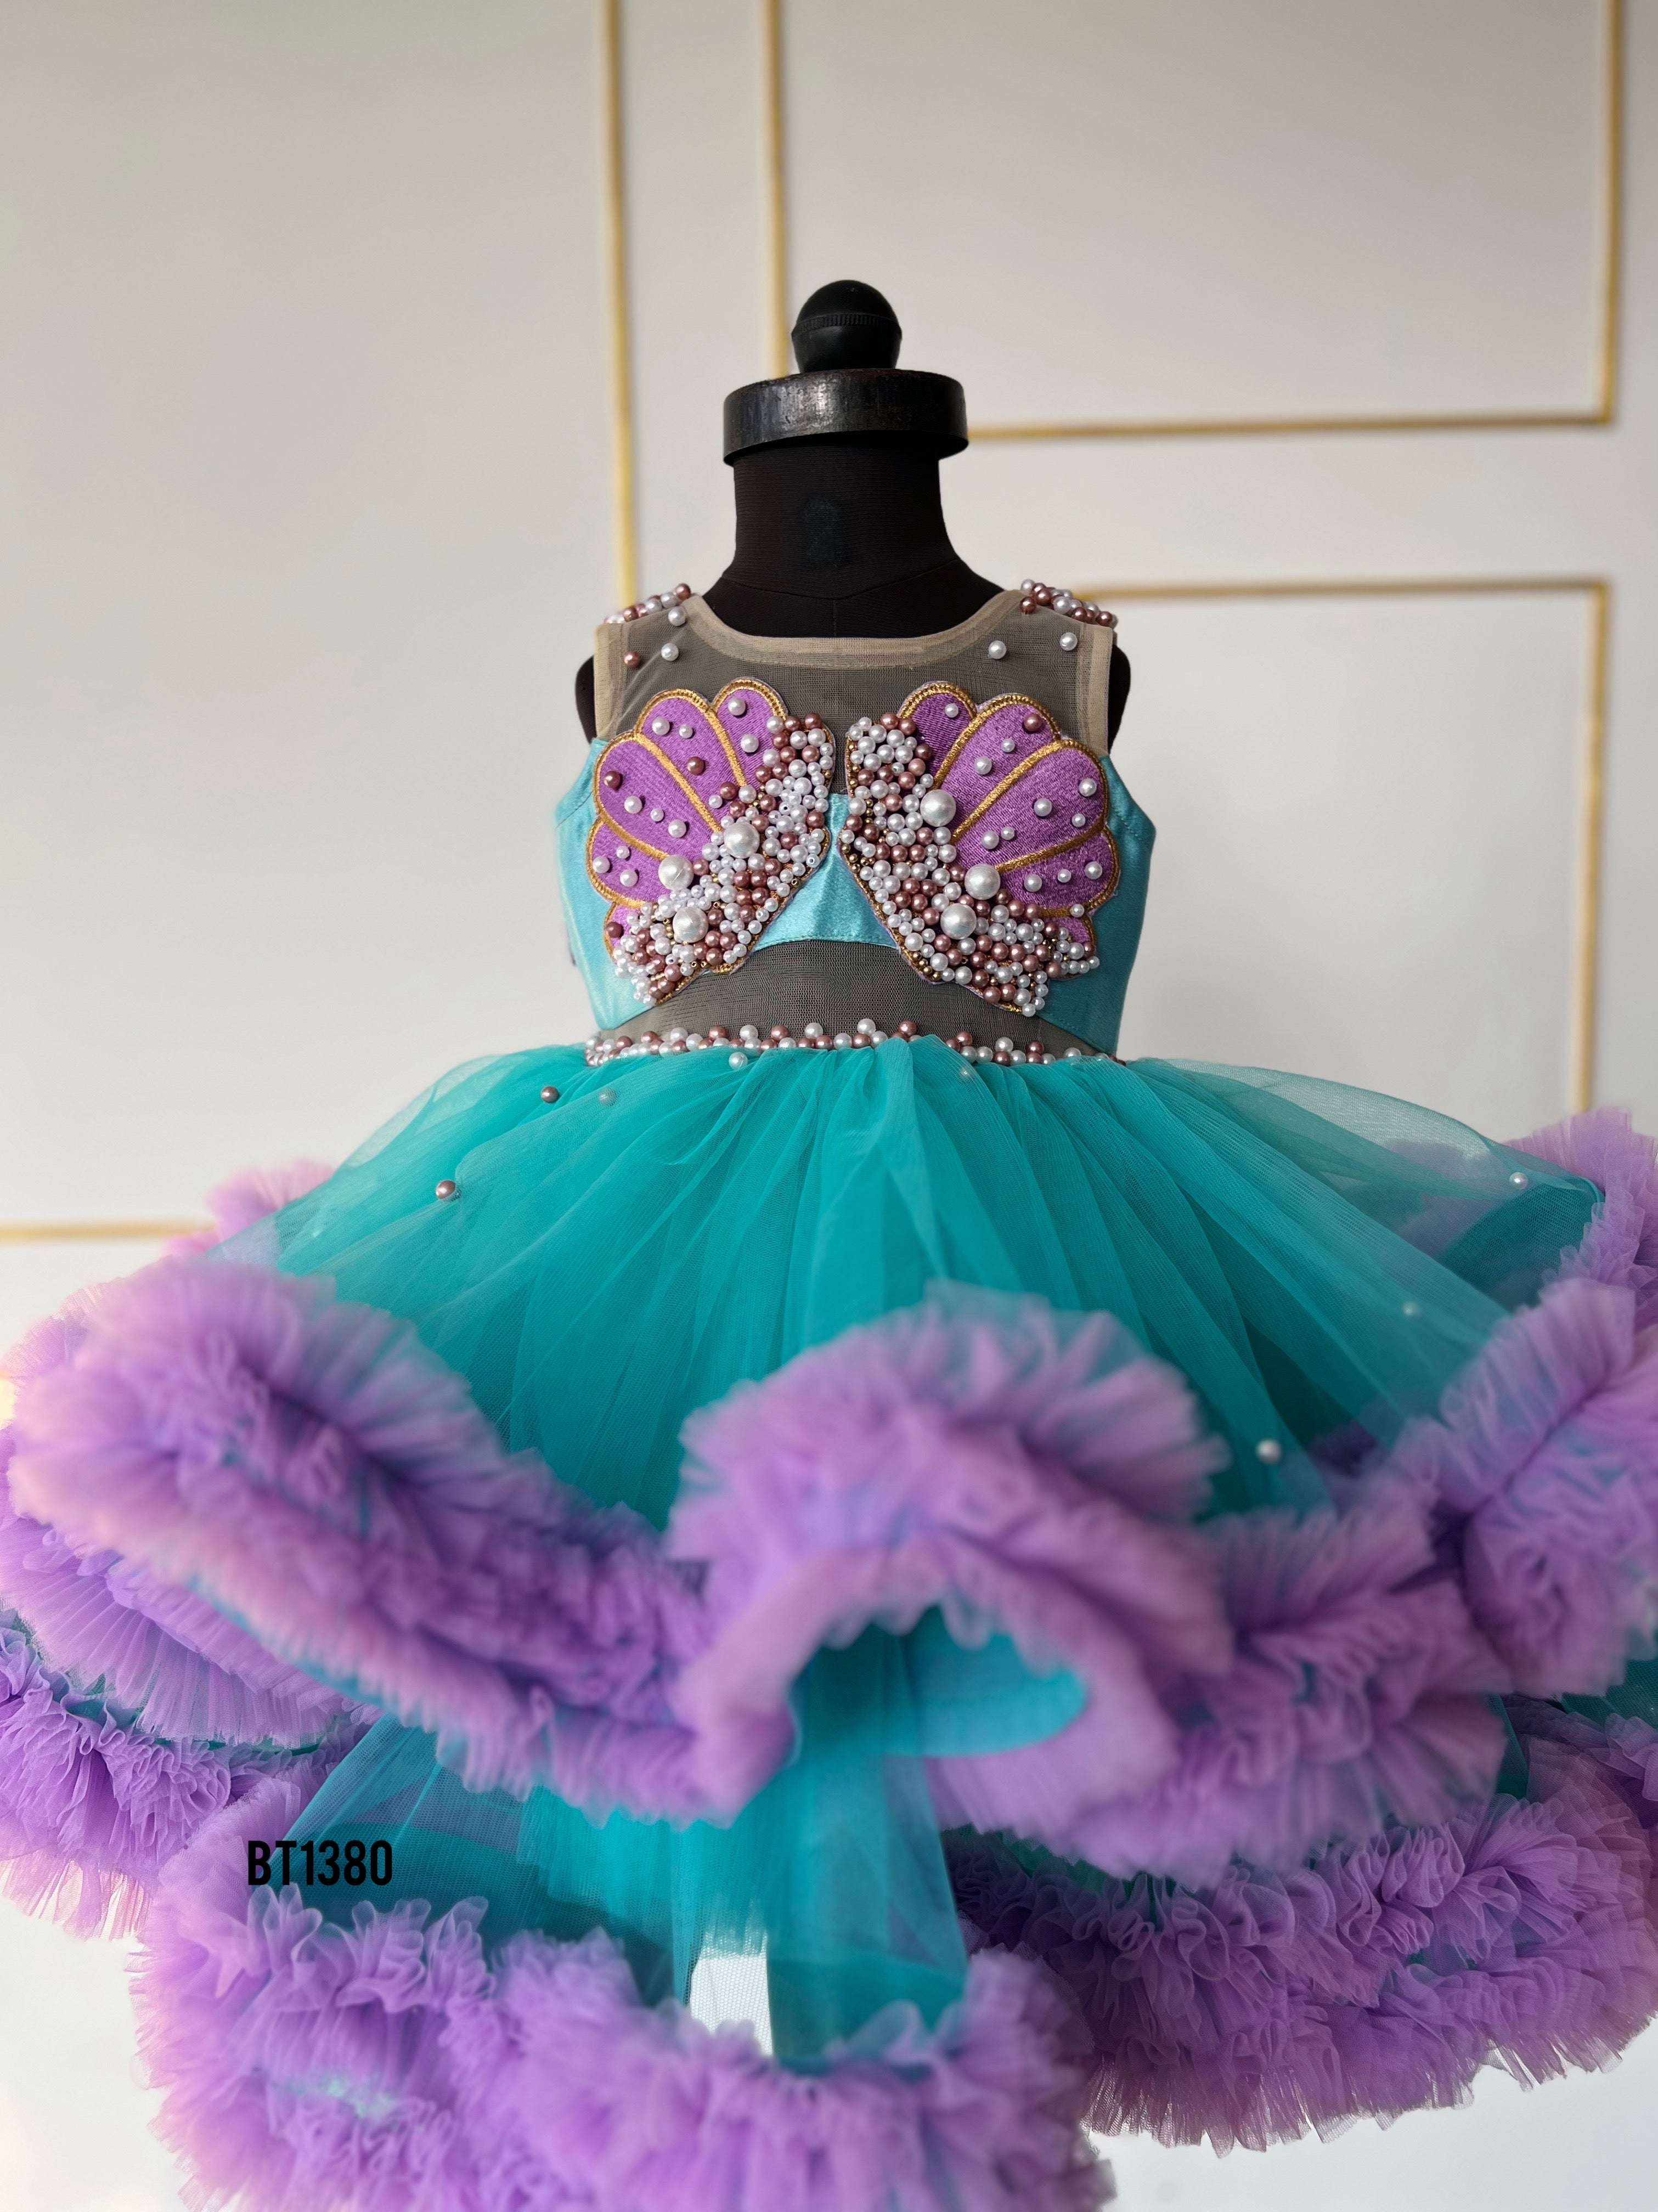 BT1380 Turquoise Butterfly Princess Dress - Spread the Wings of